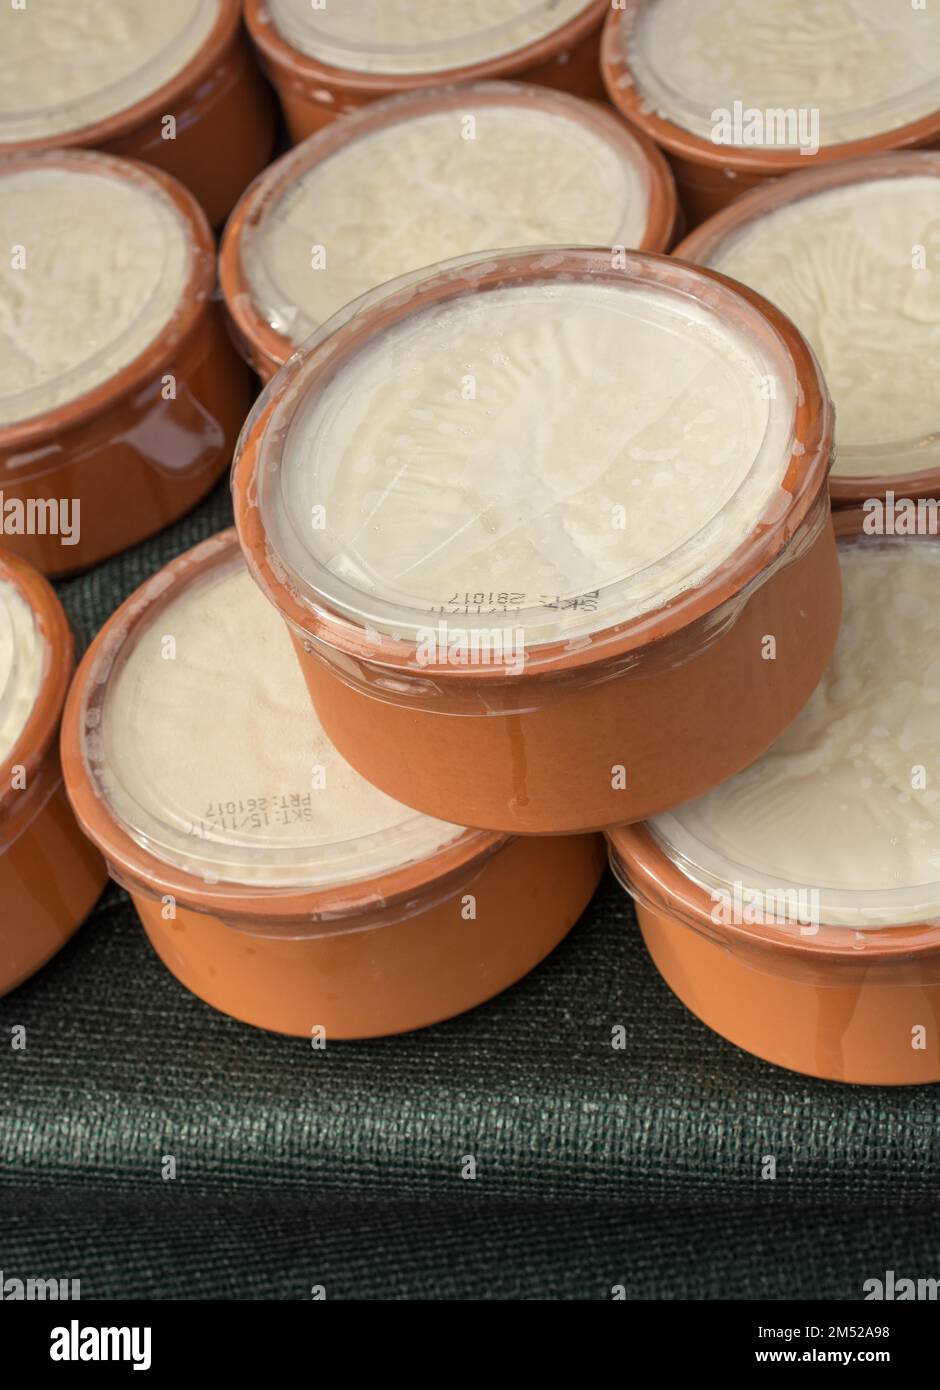 Kaymak, a creamy dairy product similar to cream, made from milk, in clay pots Stock Photo